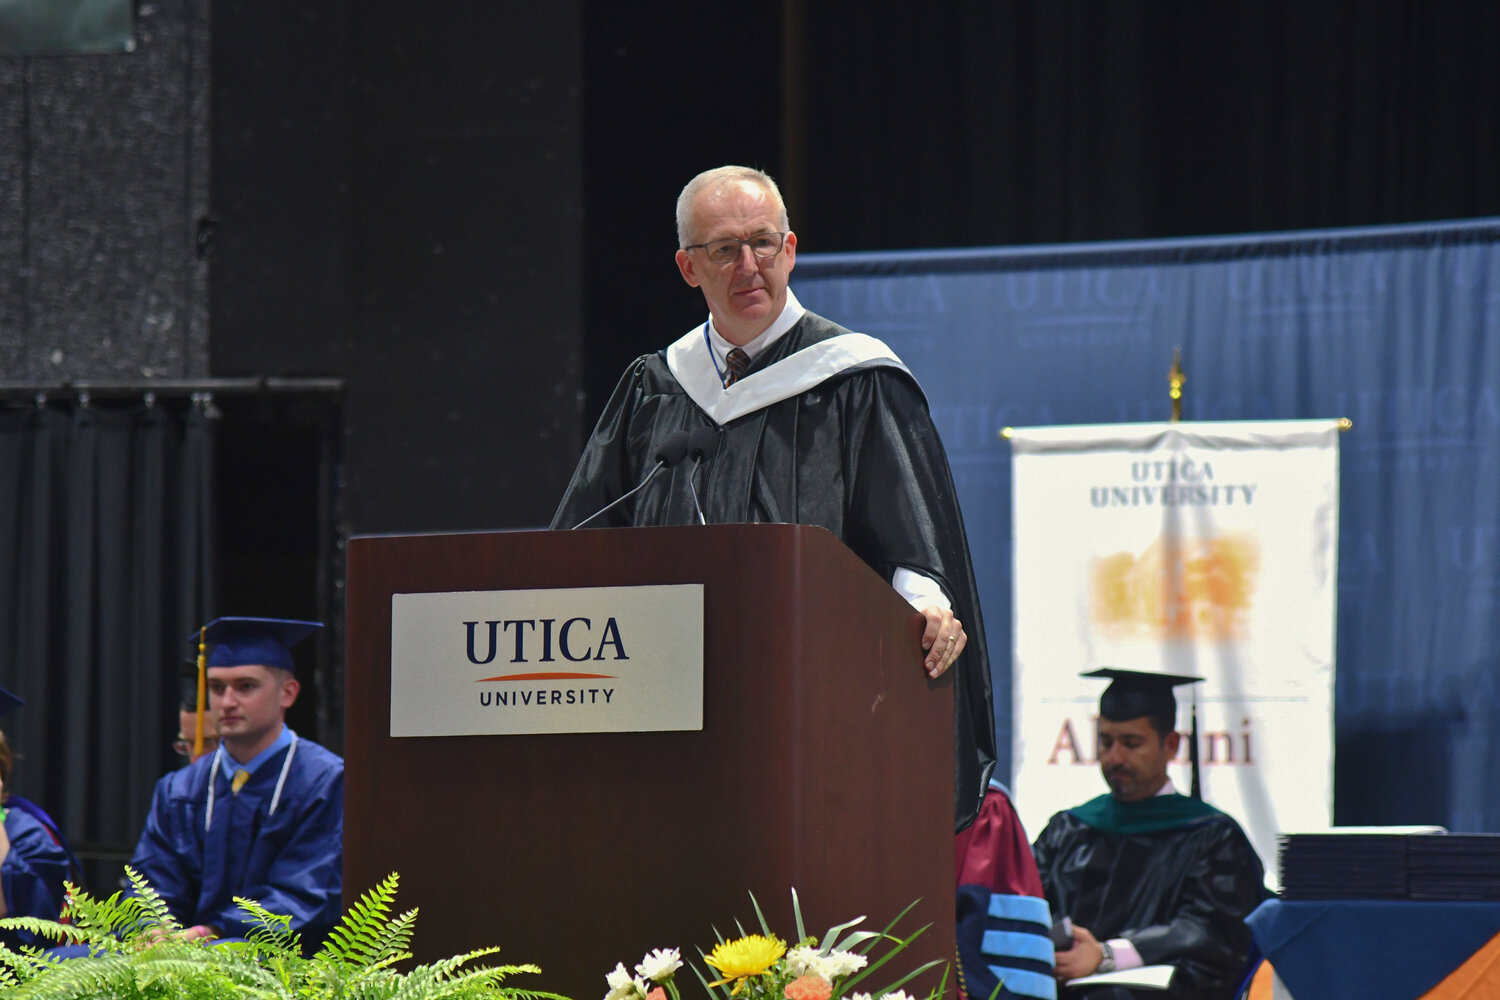 SEC Commissioner Greg Sanky was the keynote speaker at Utica University's 74th undergraduate commencement ceremony. Sanky is a native to upstate New York and began his career working for Utica University as director of intramural sports